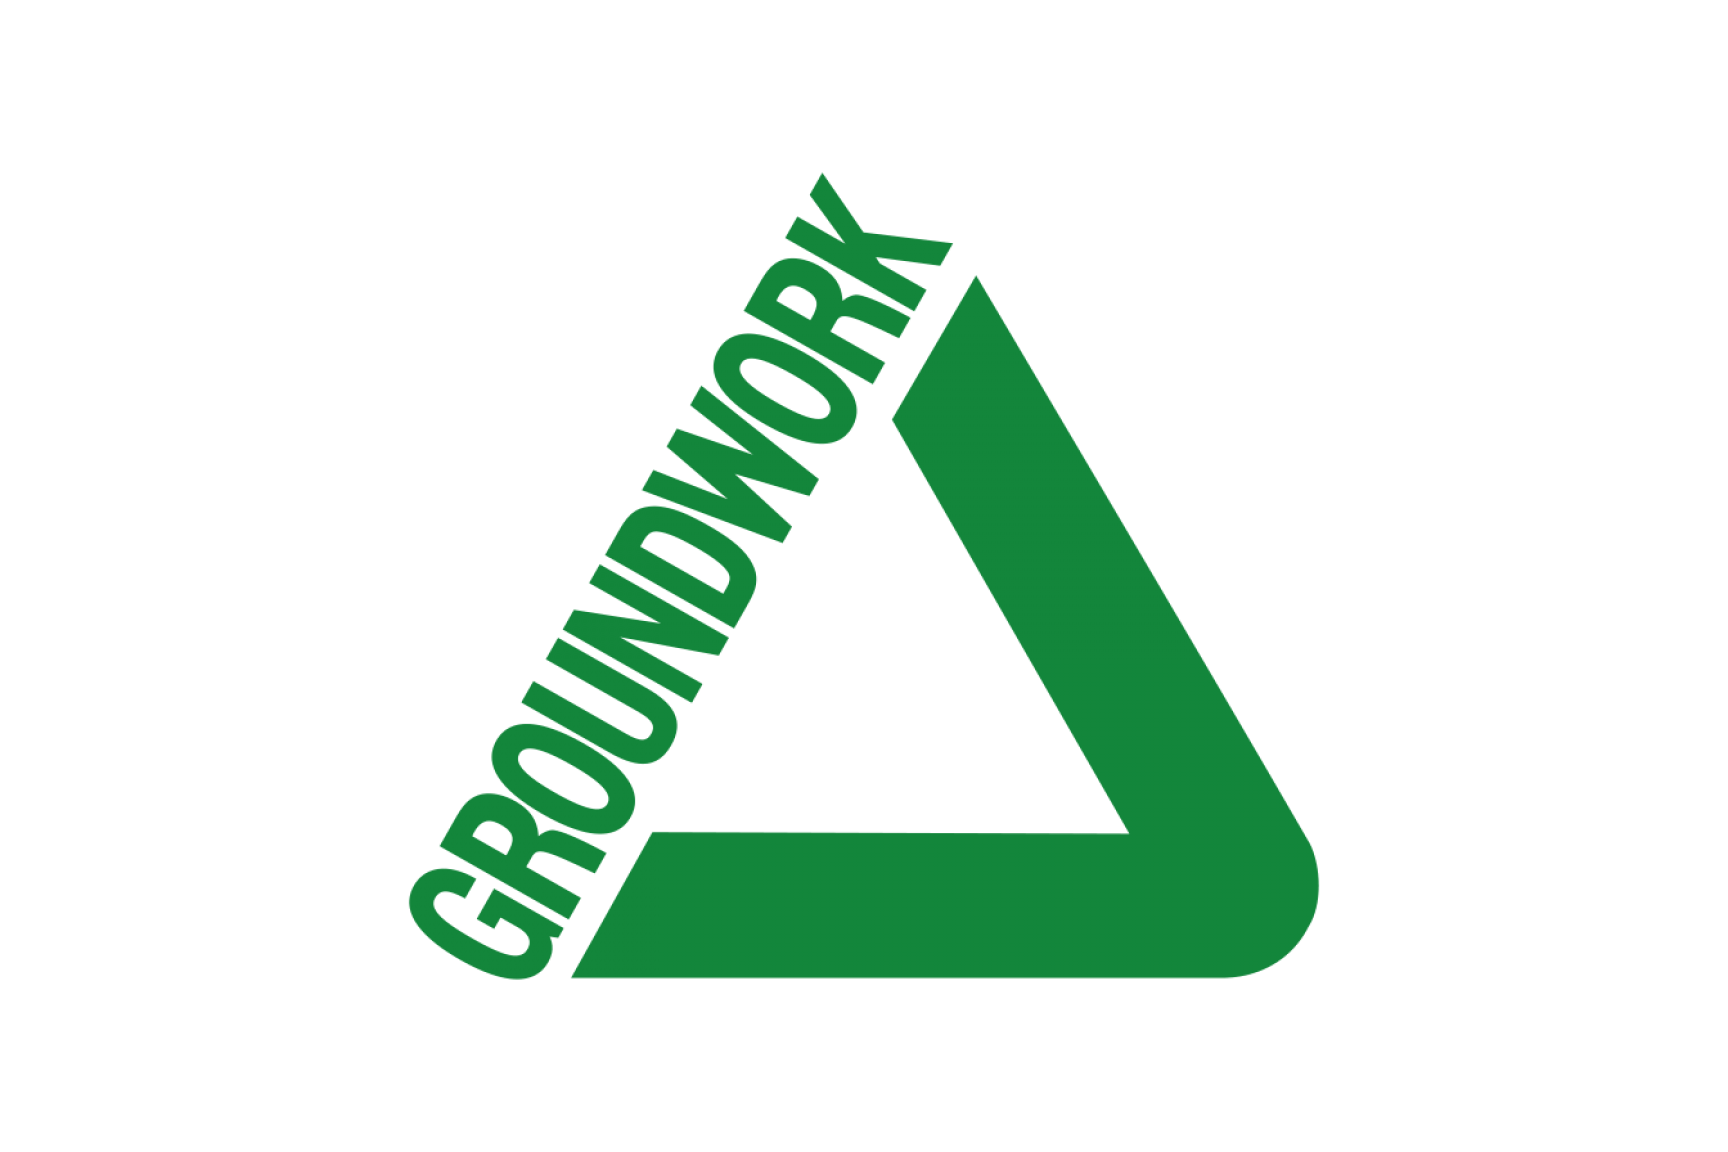 Groundwork, federation of charities